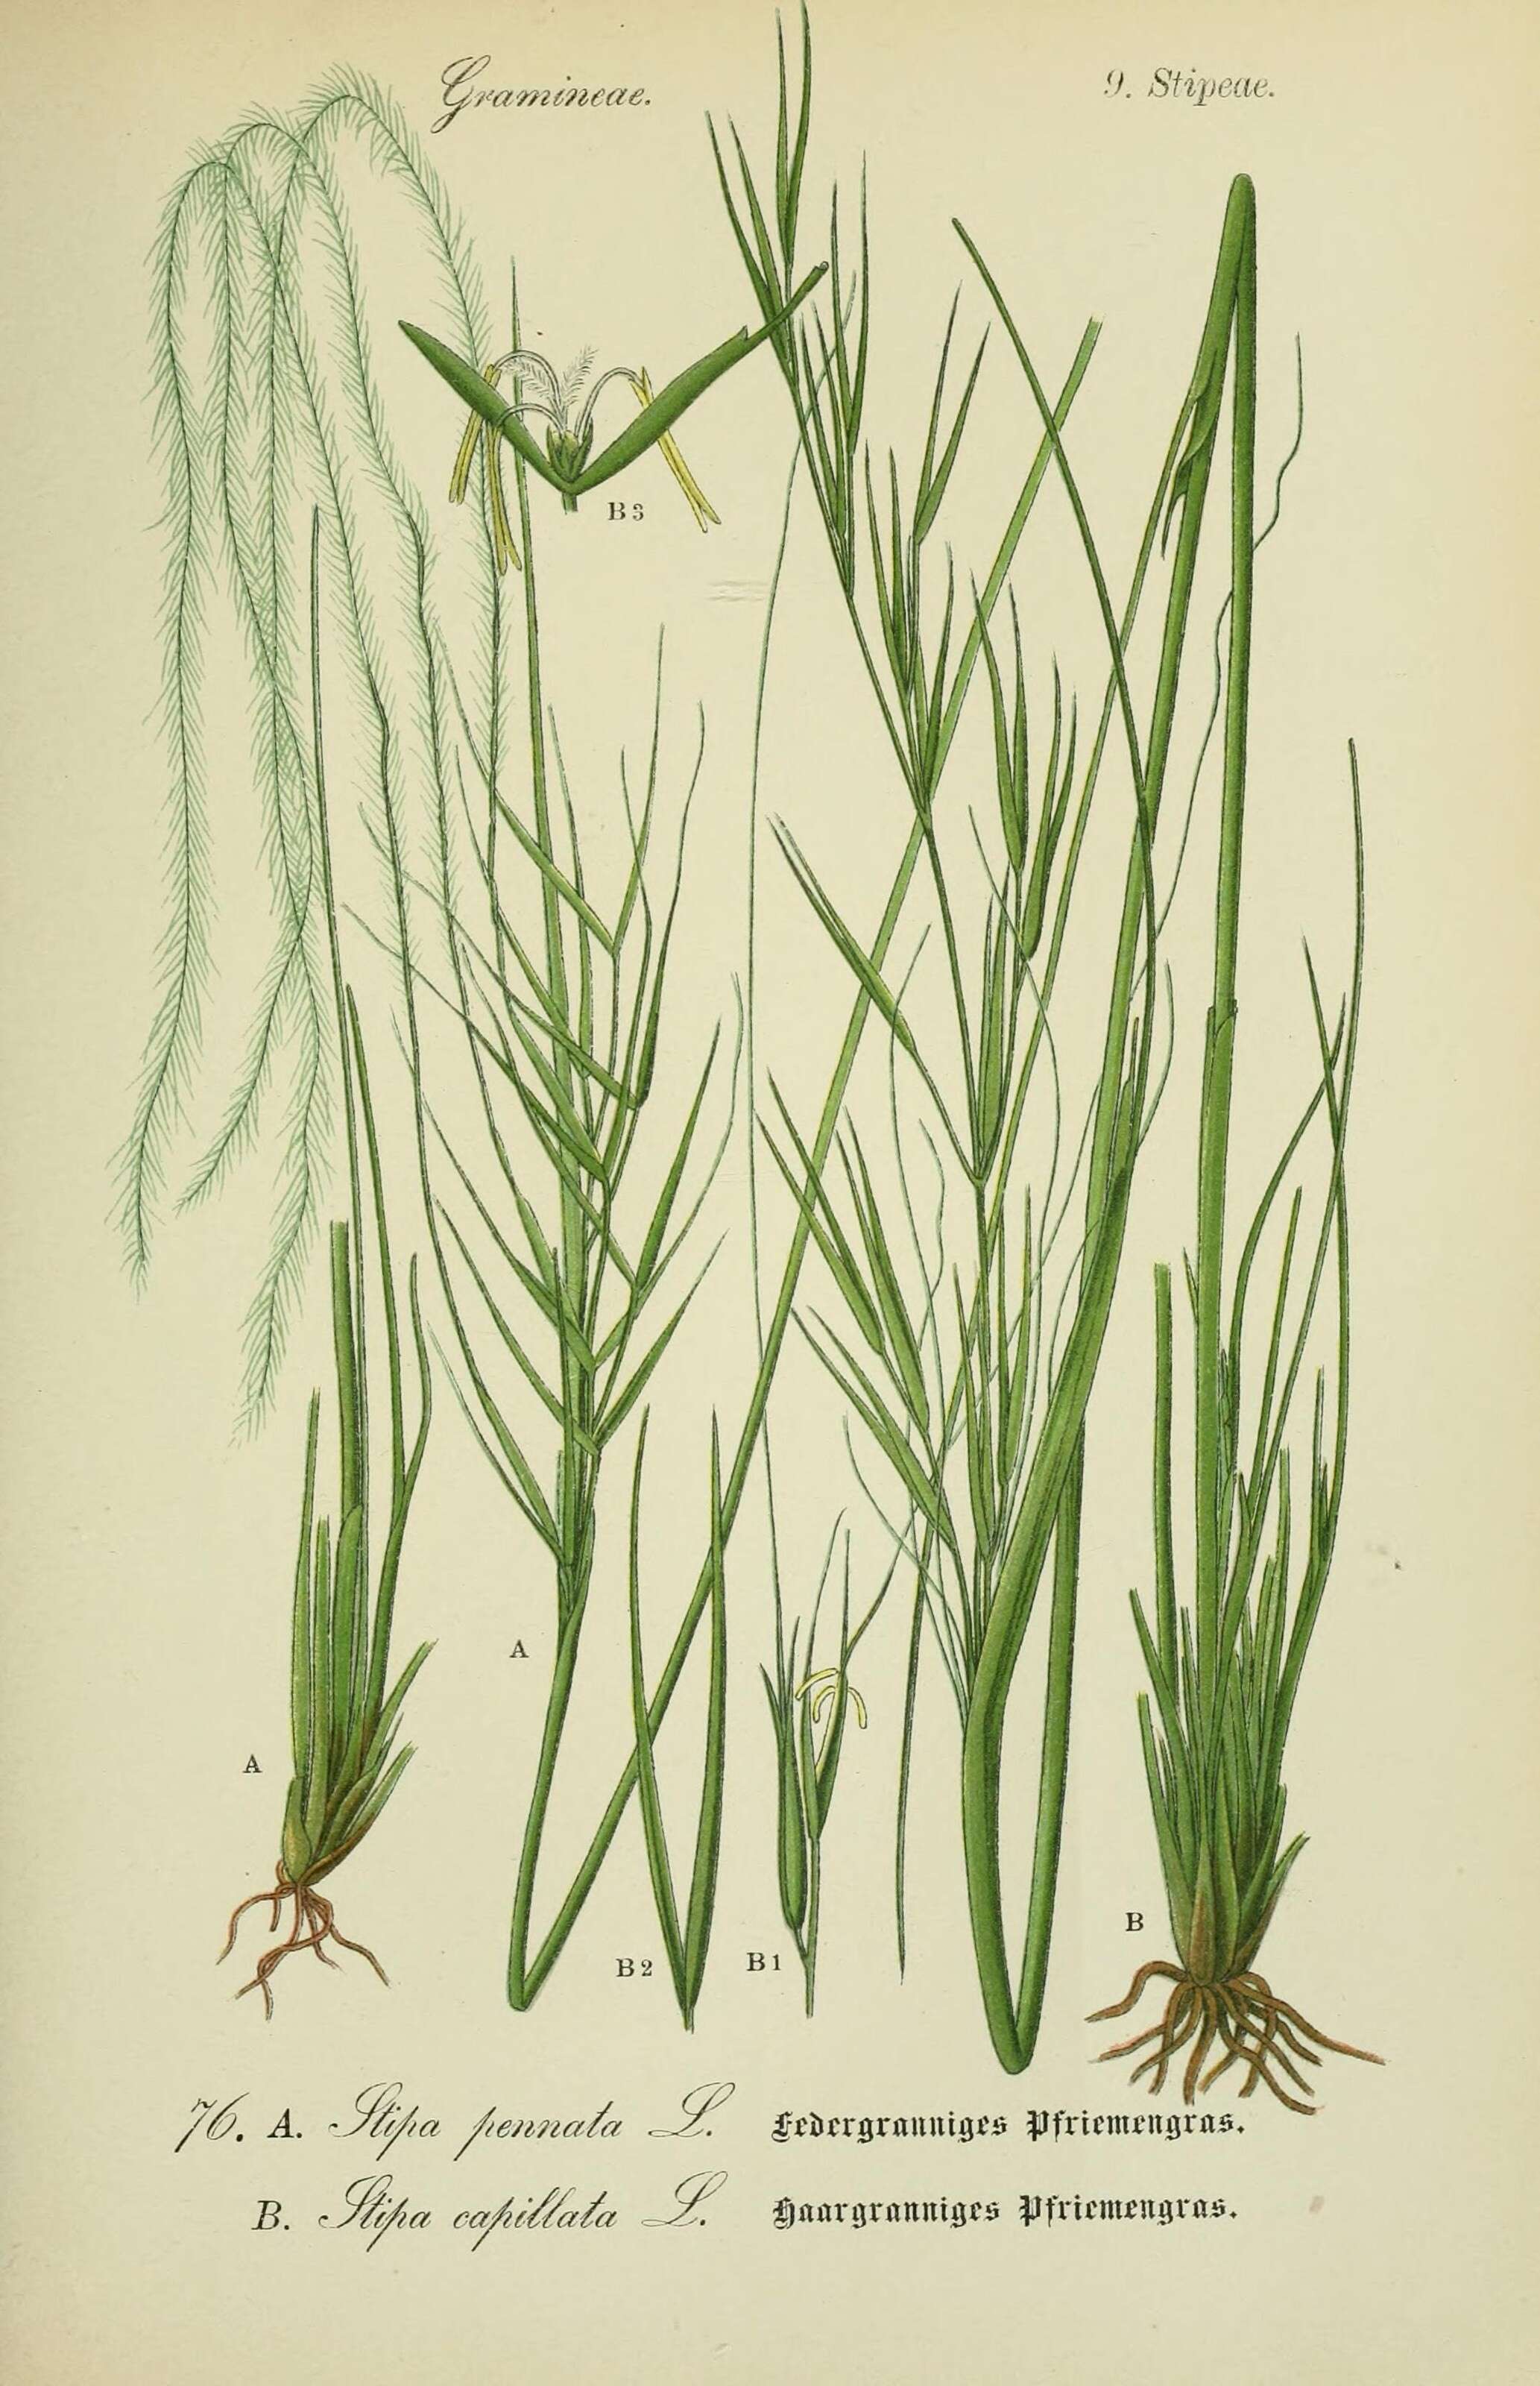 Image of dwarf feather grass